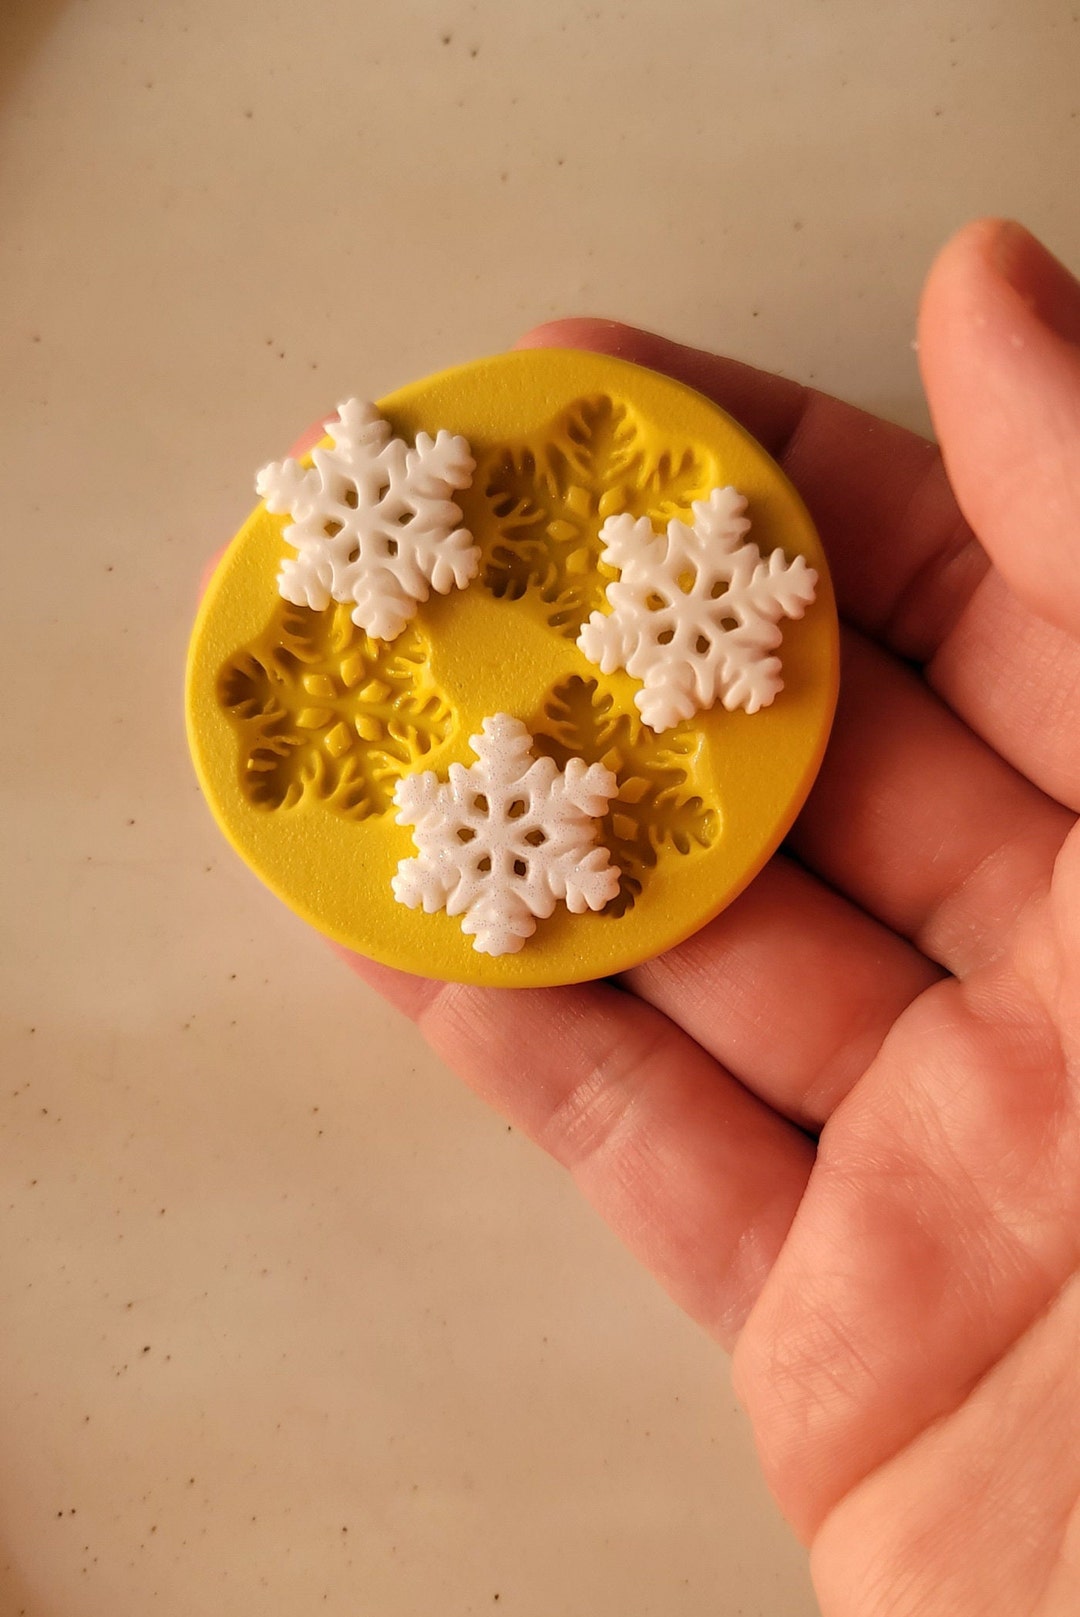 Mini Flowers Silicone Mold for Chocolate Flower Mold for Fondant